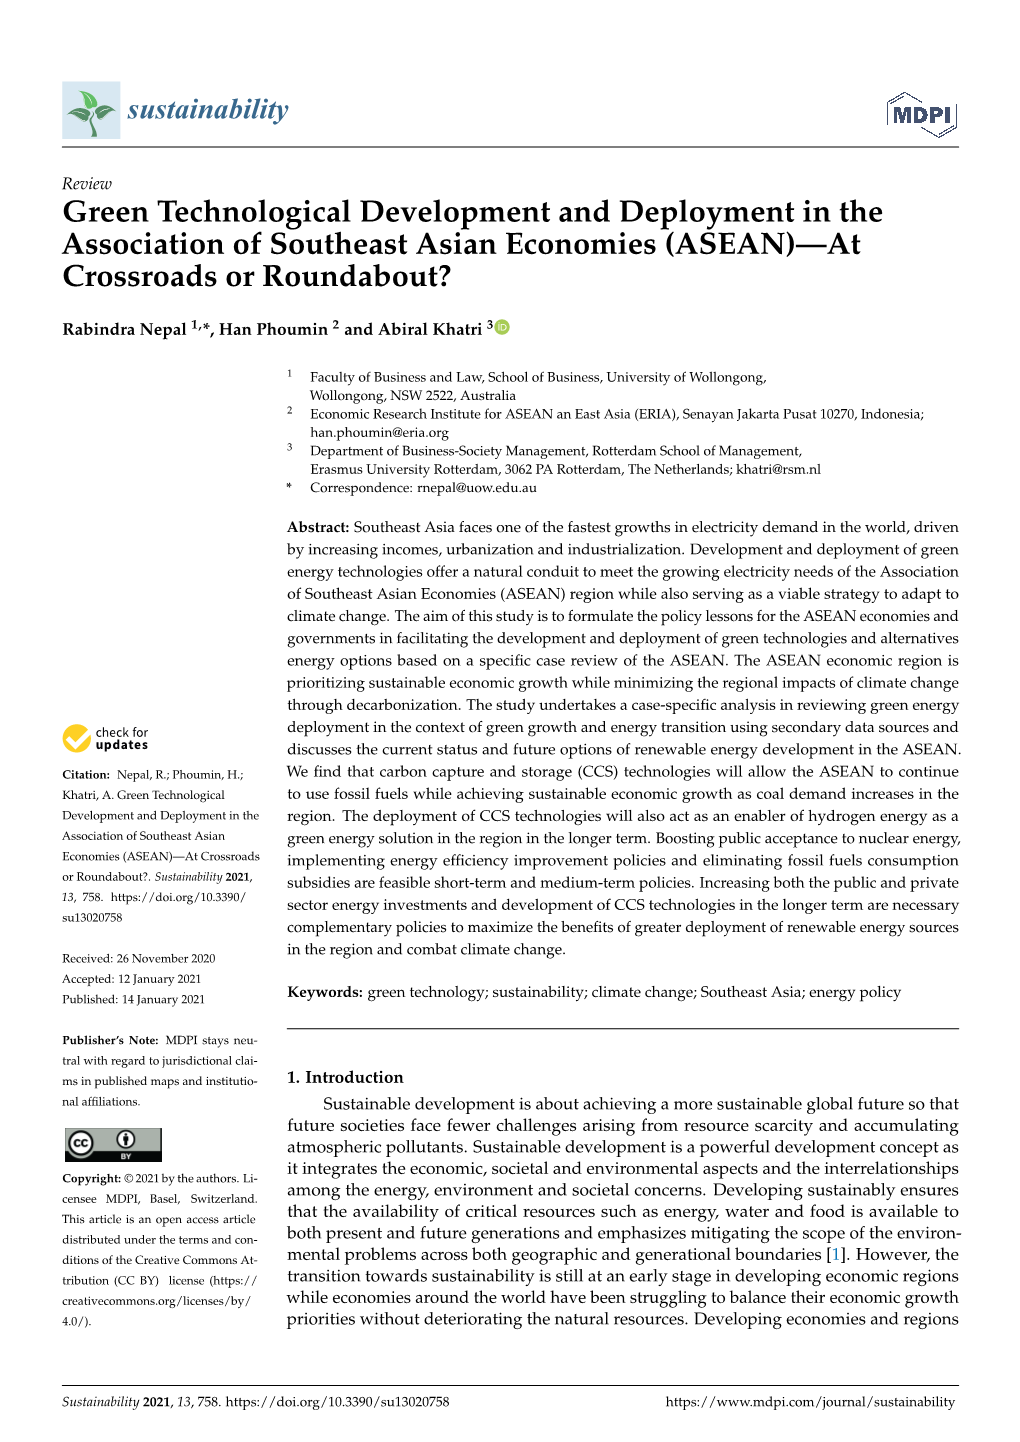 Green Technological Development and Deployment in the Association of Southeast Asian Economies (ASEAN)—At Crossroads Or Roundabout?